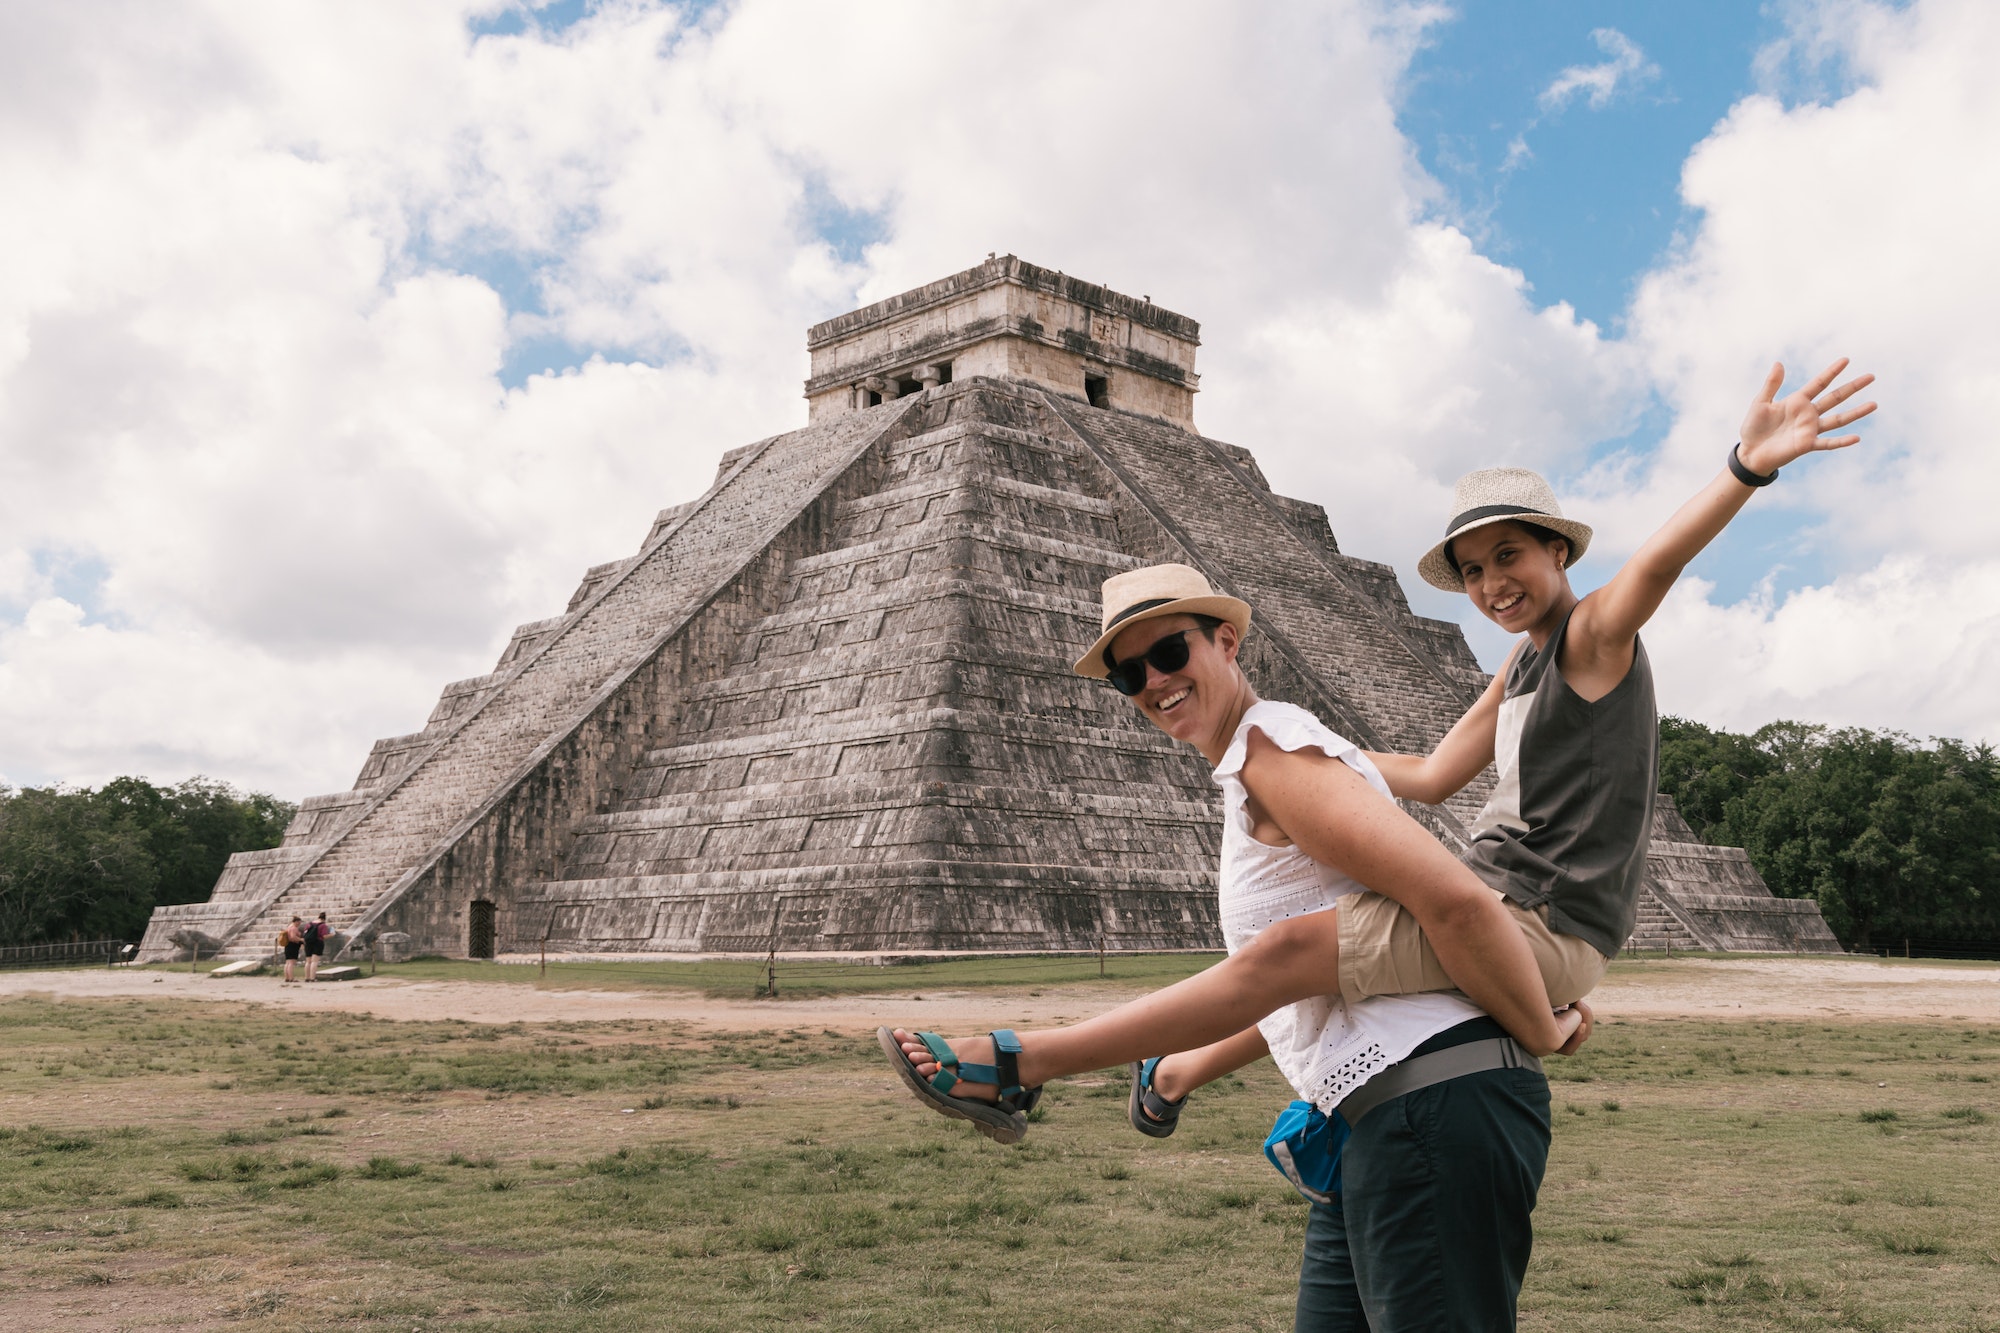 Family vacations, mother and daughter together, pyramid in Chichen Itza, Yucatan, Mexico